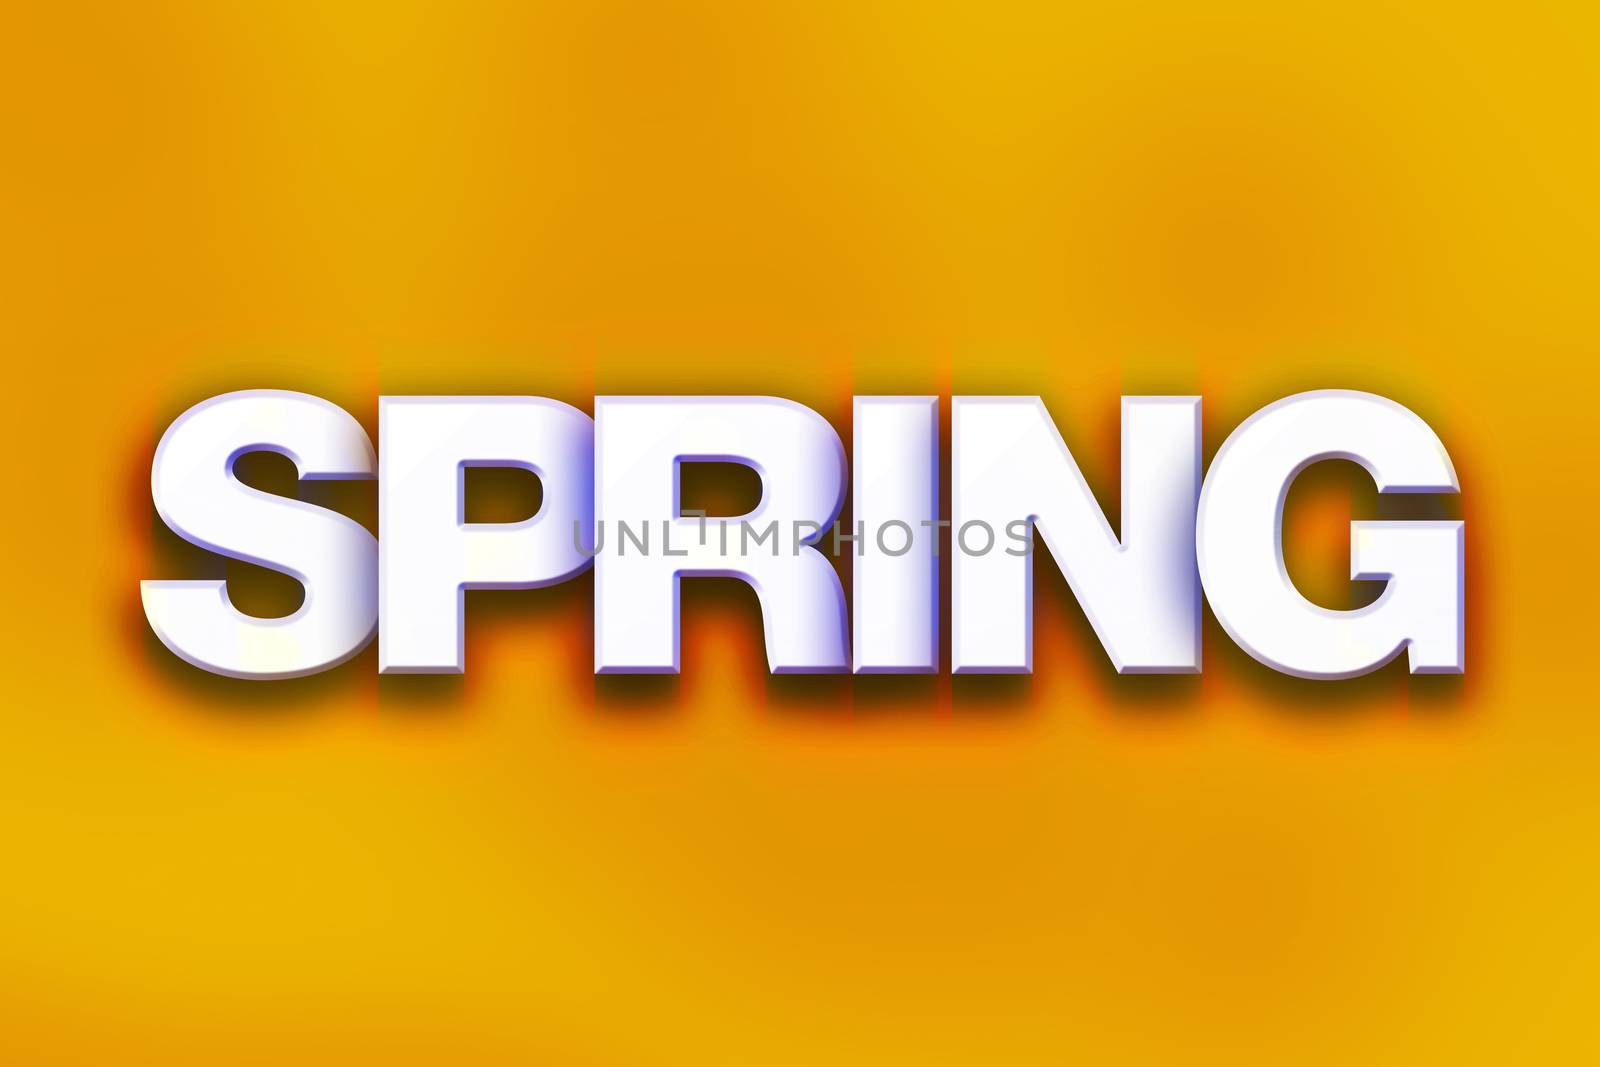 The word "Spring" written in white 3D letters on a colorful background concept and theme.